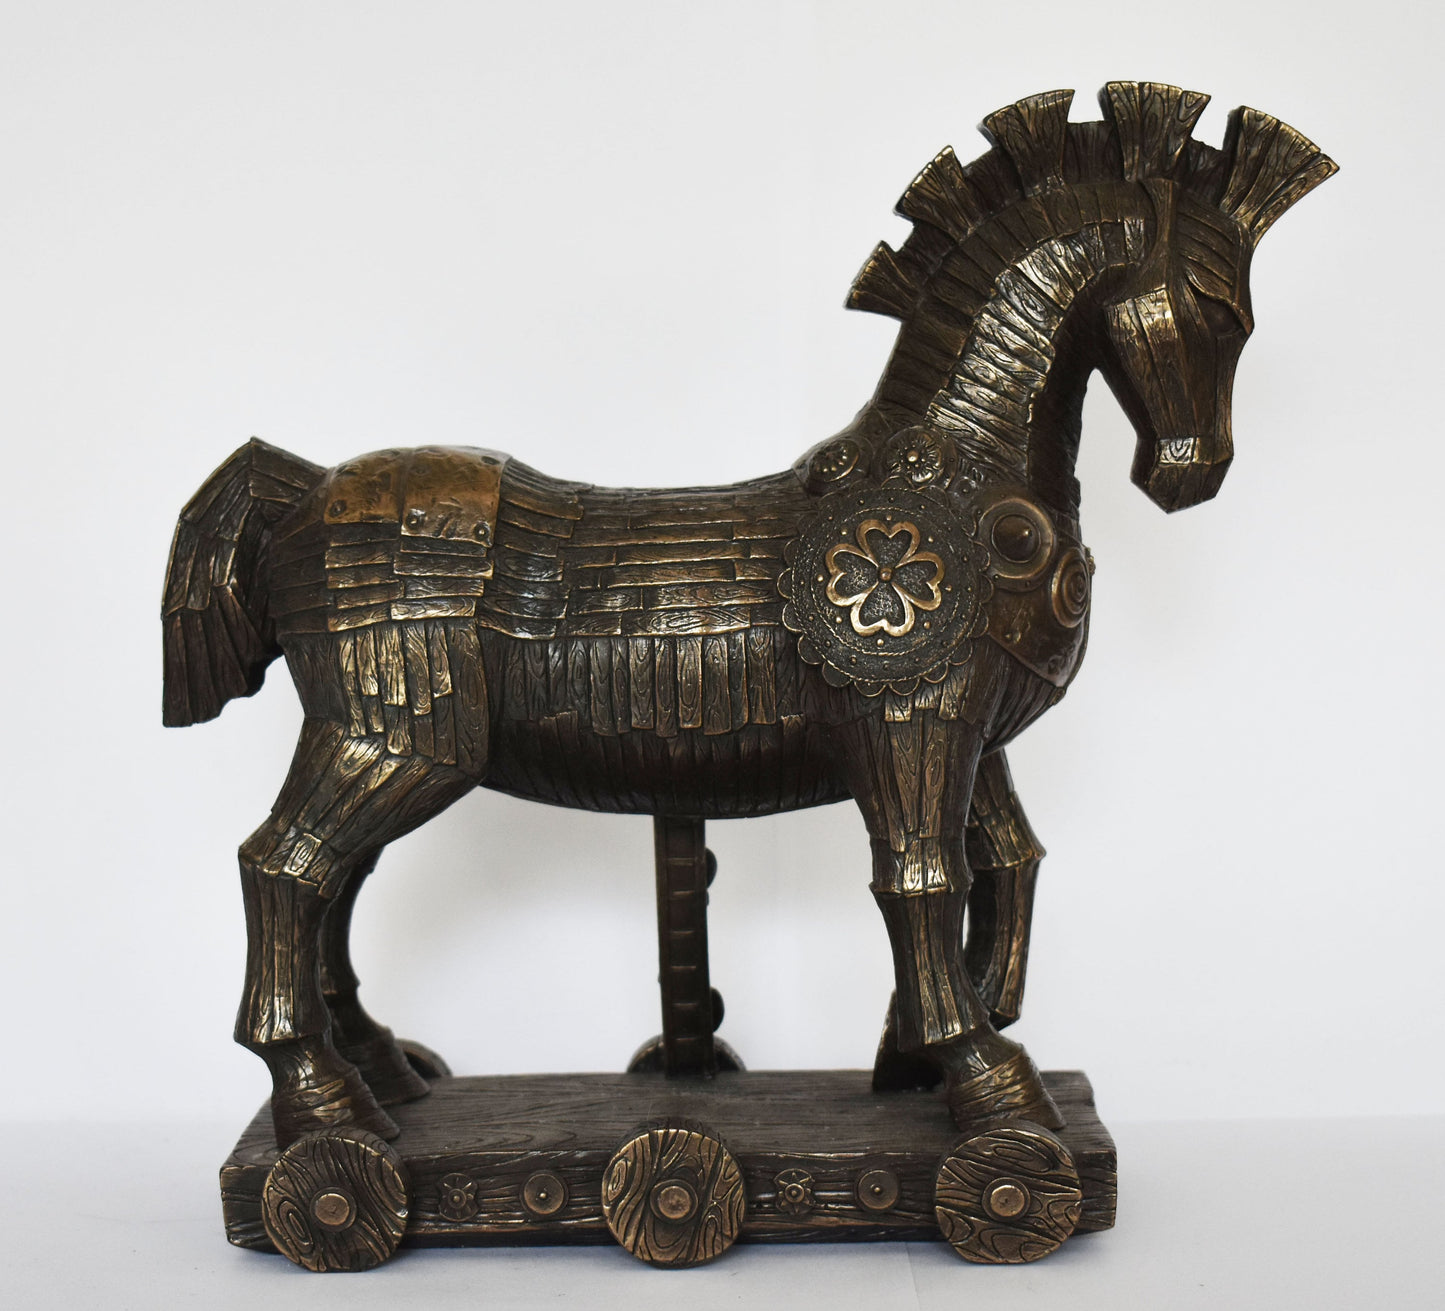 Trojan Horse - Hollow - Used by the Greeks to Conquer Troy - Homer's Iliad - Cold Cast Bronze Resin